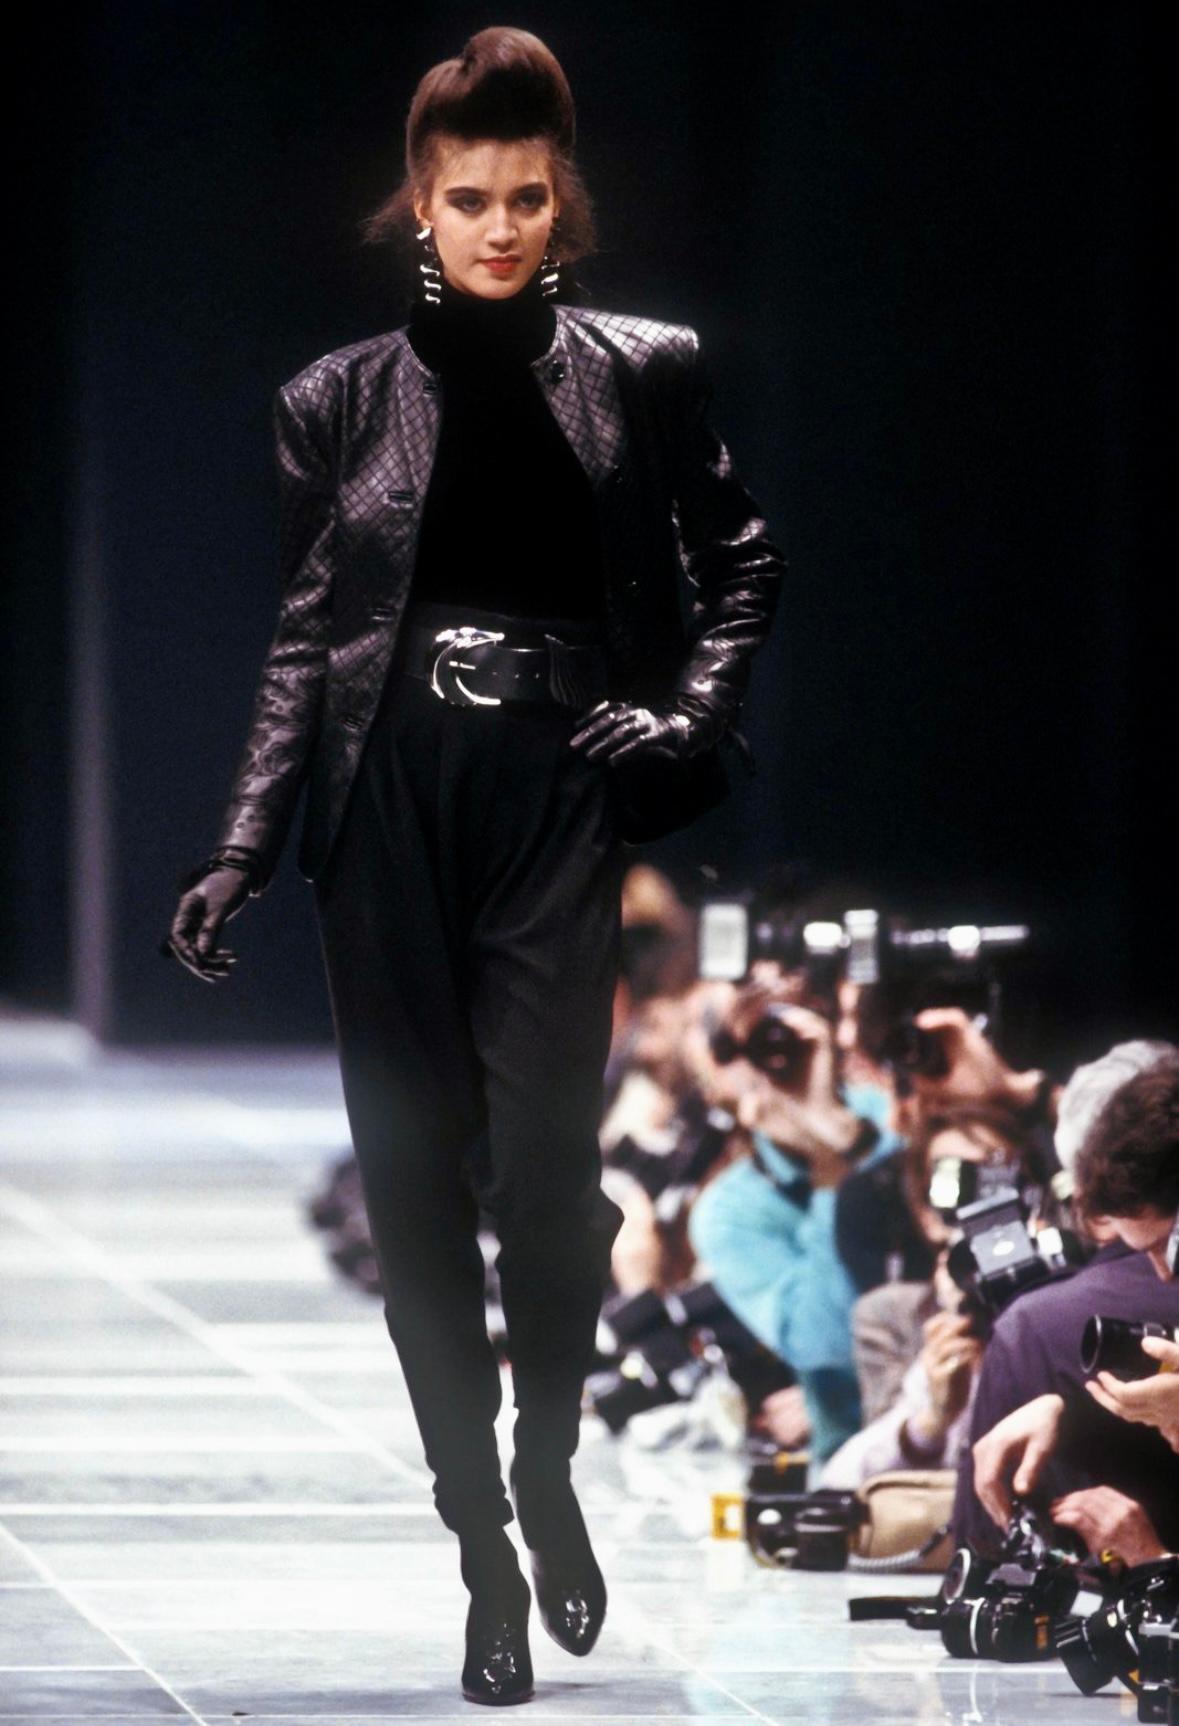 Presenting a beautiful black leather embroidered Gianni Versace skirt set, designed by Gianni Versace. From the Fall/Winter 1986 collection, this jacket from this set debuted on the season's runway. The set consists of a quilted collarless leather